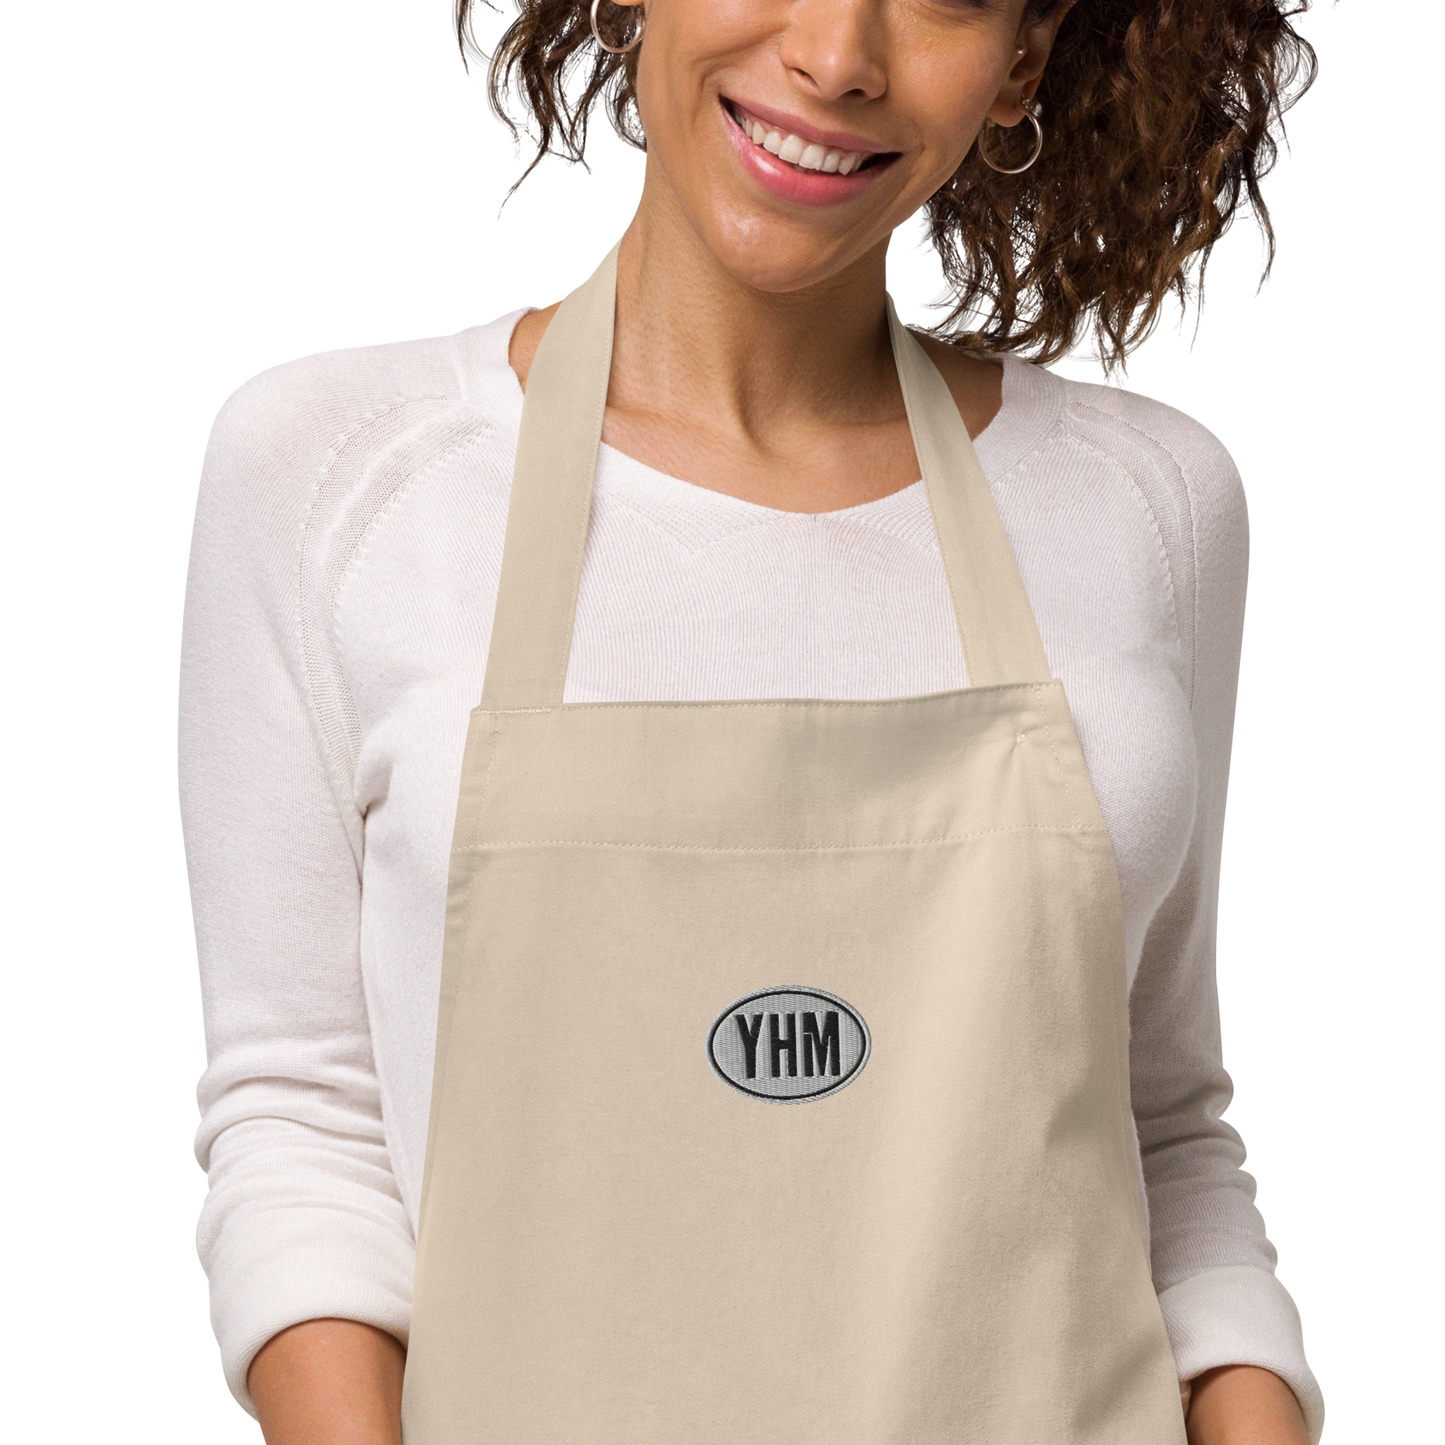 Oval Car Sticker Organic Cotton Apron • Black and White Embroidery